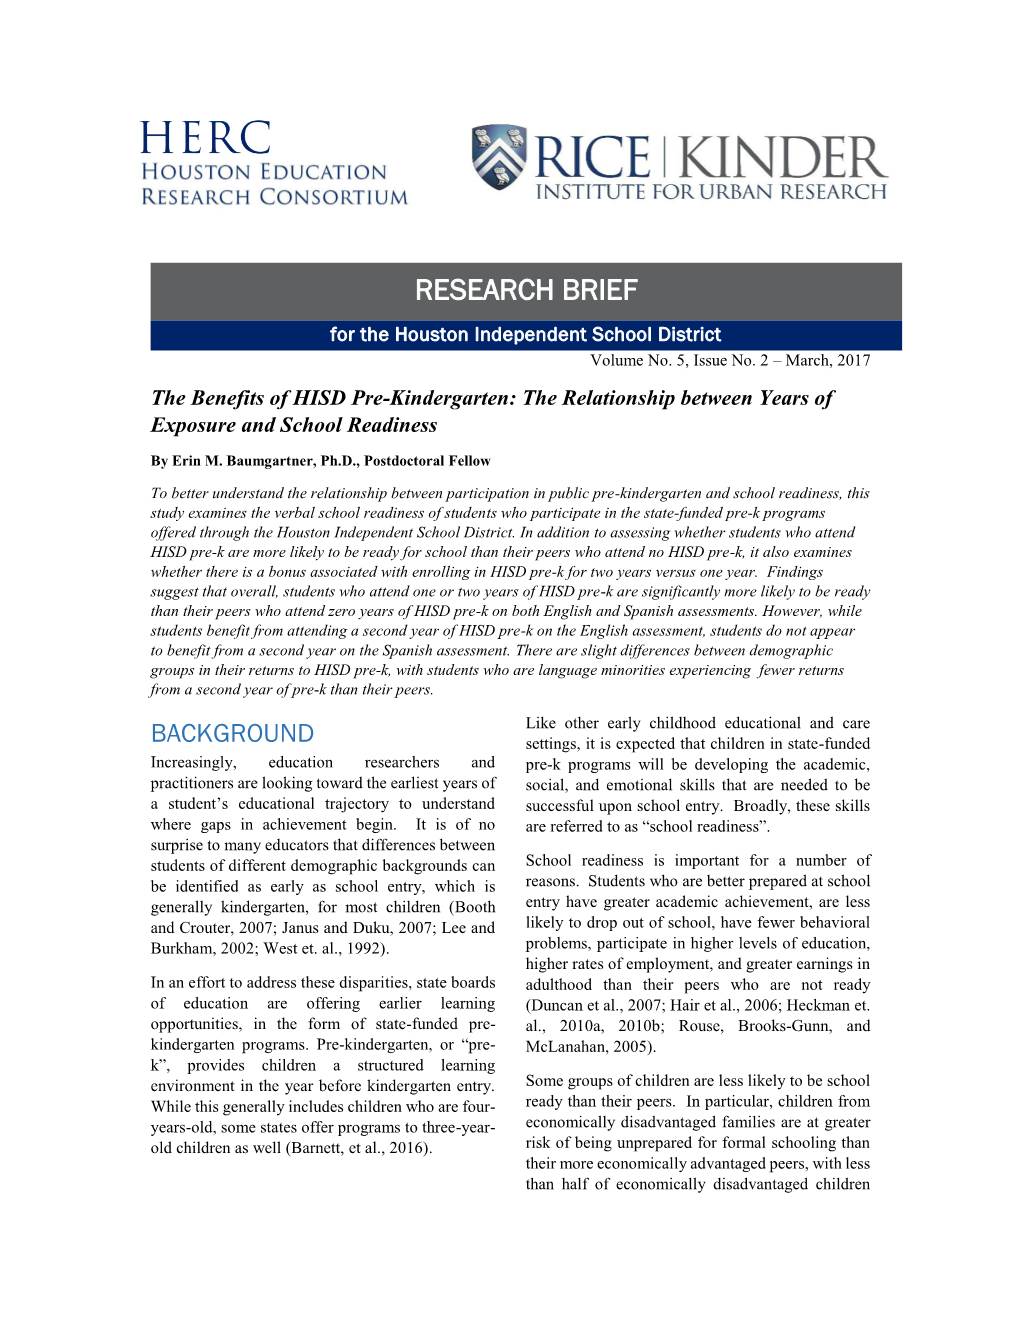 RESEARCH BRIEF for the Houston Independent School District Volume No